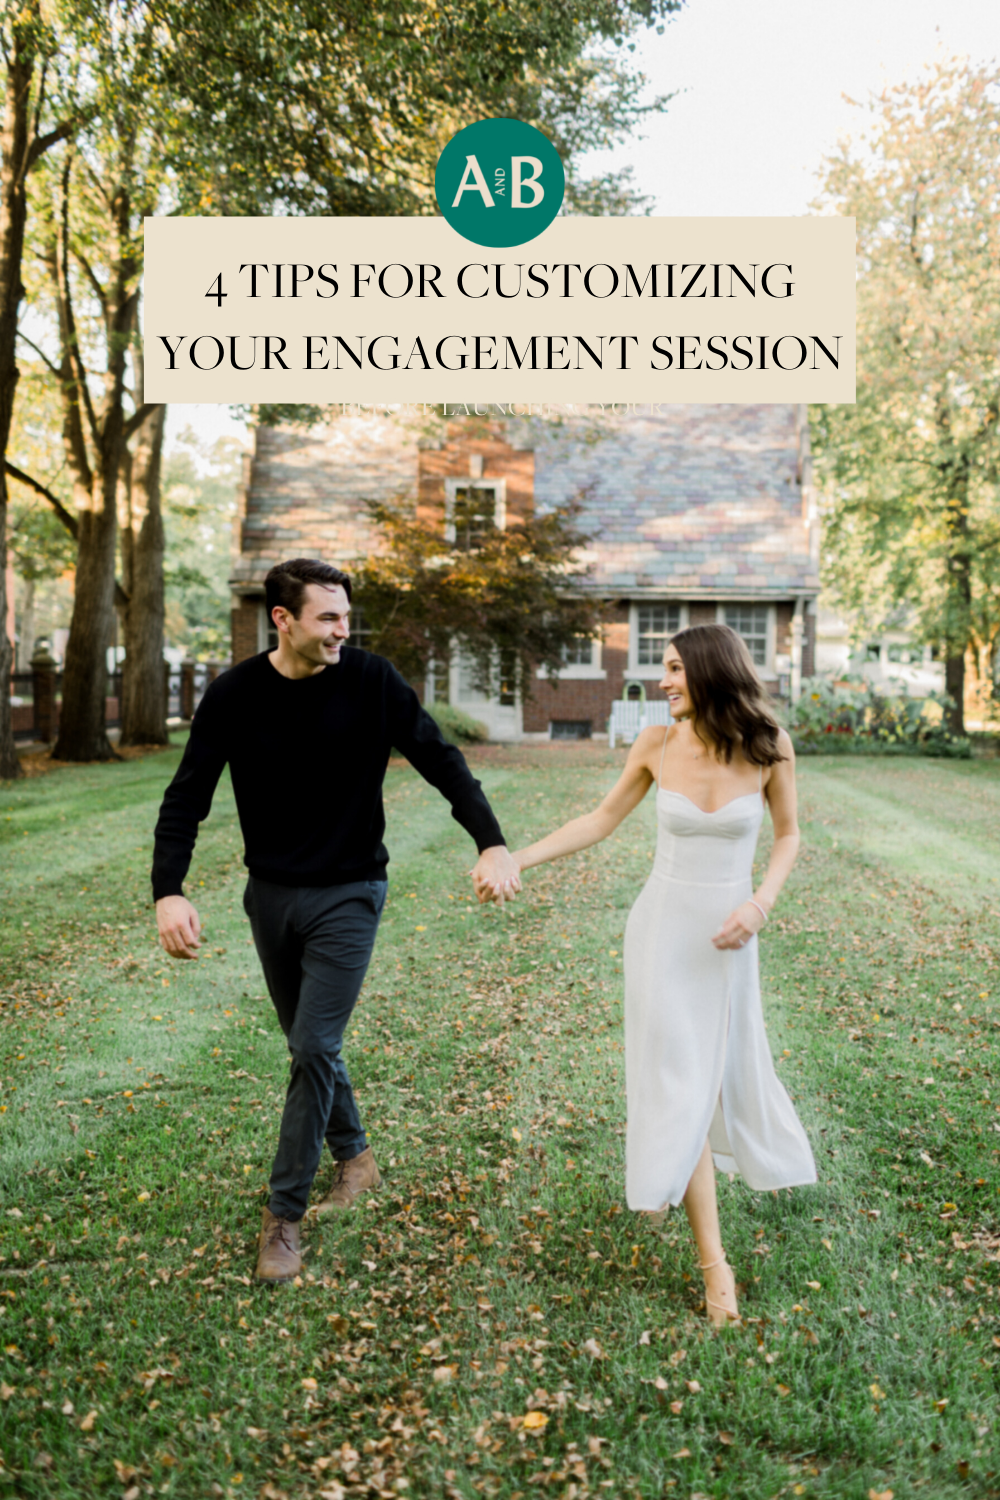 4 Tips for Customizing Your Engagement Session